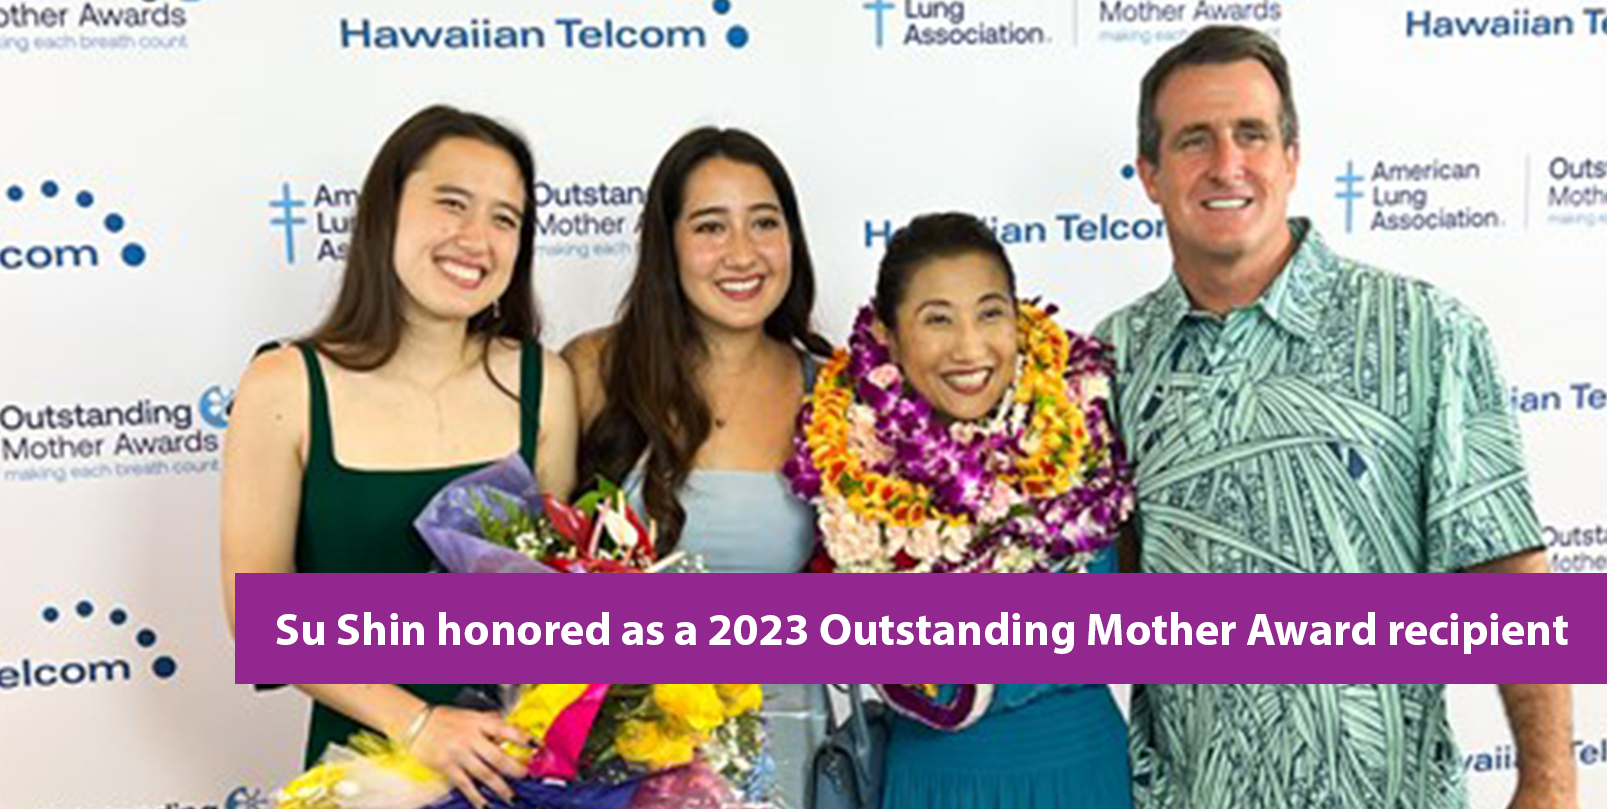 Su Shin honored as a 2023 Outstanding Mother Award recipient